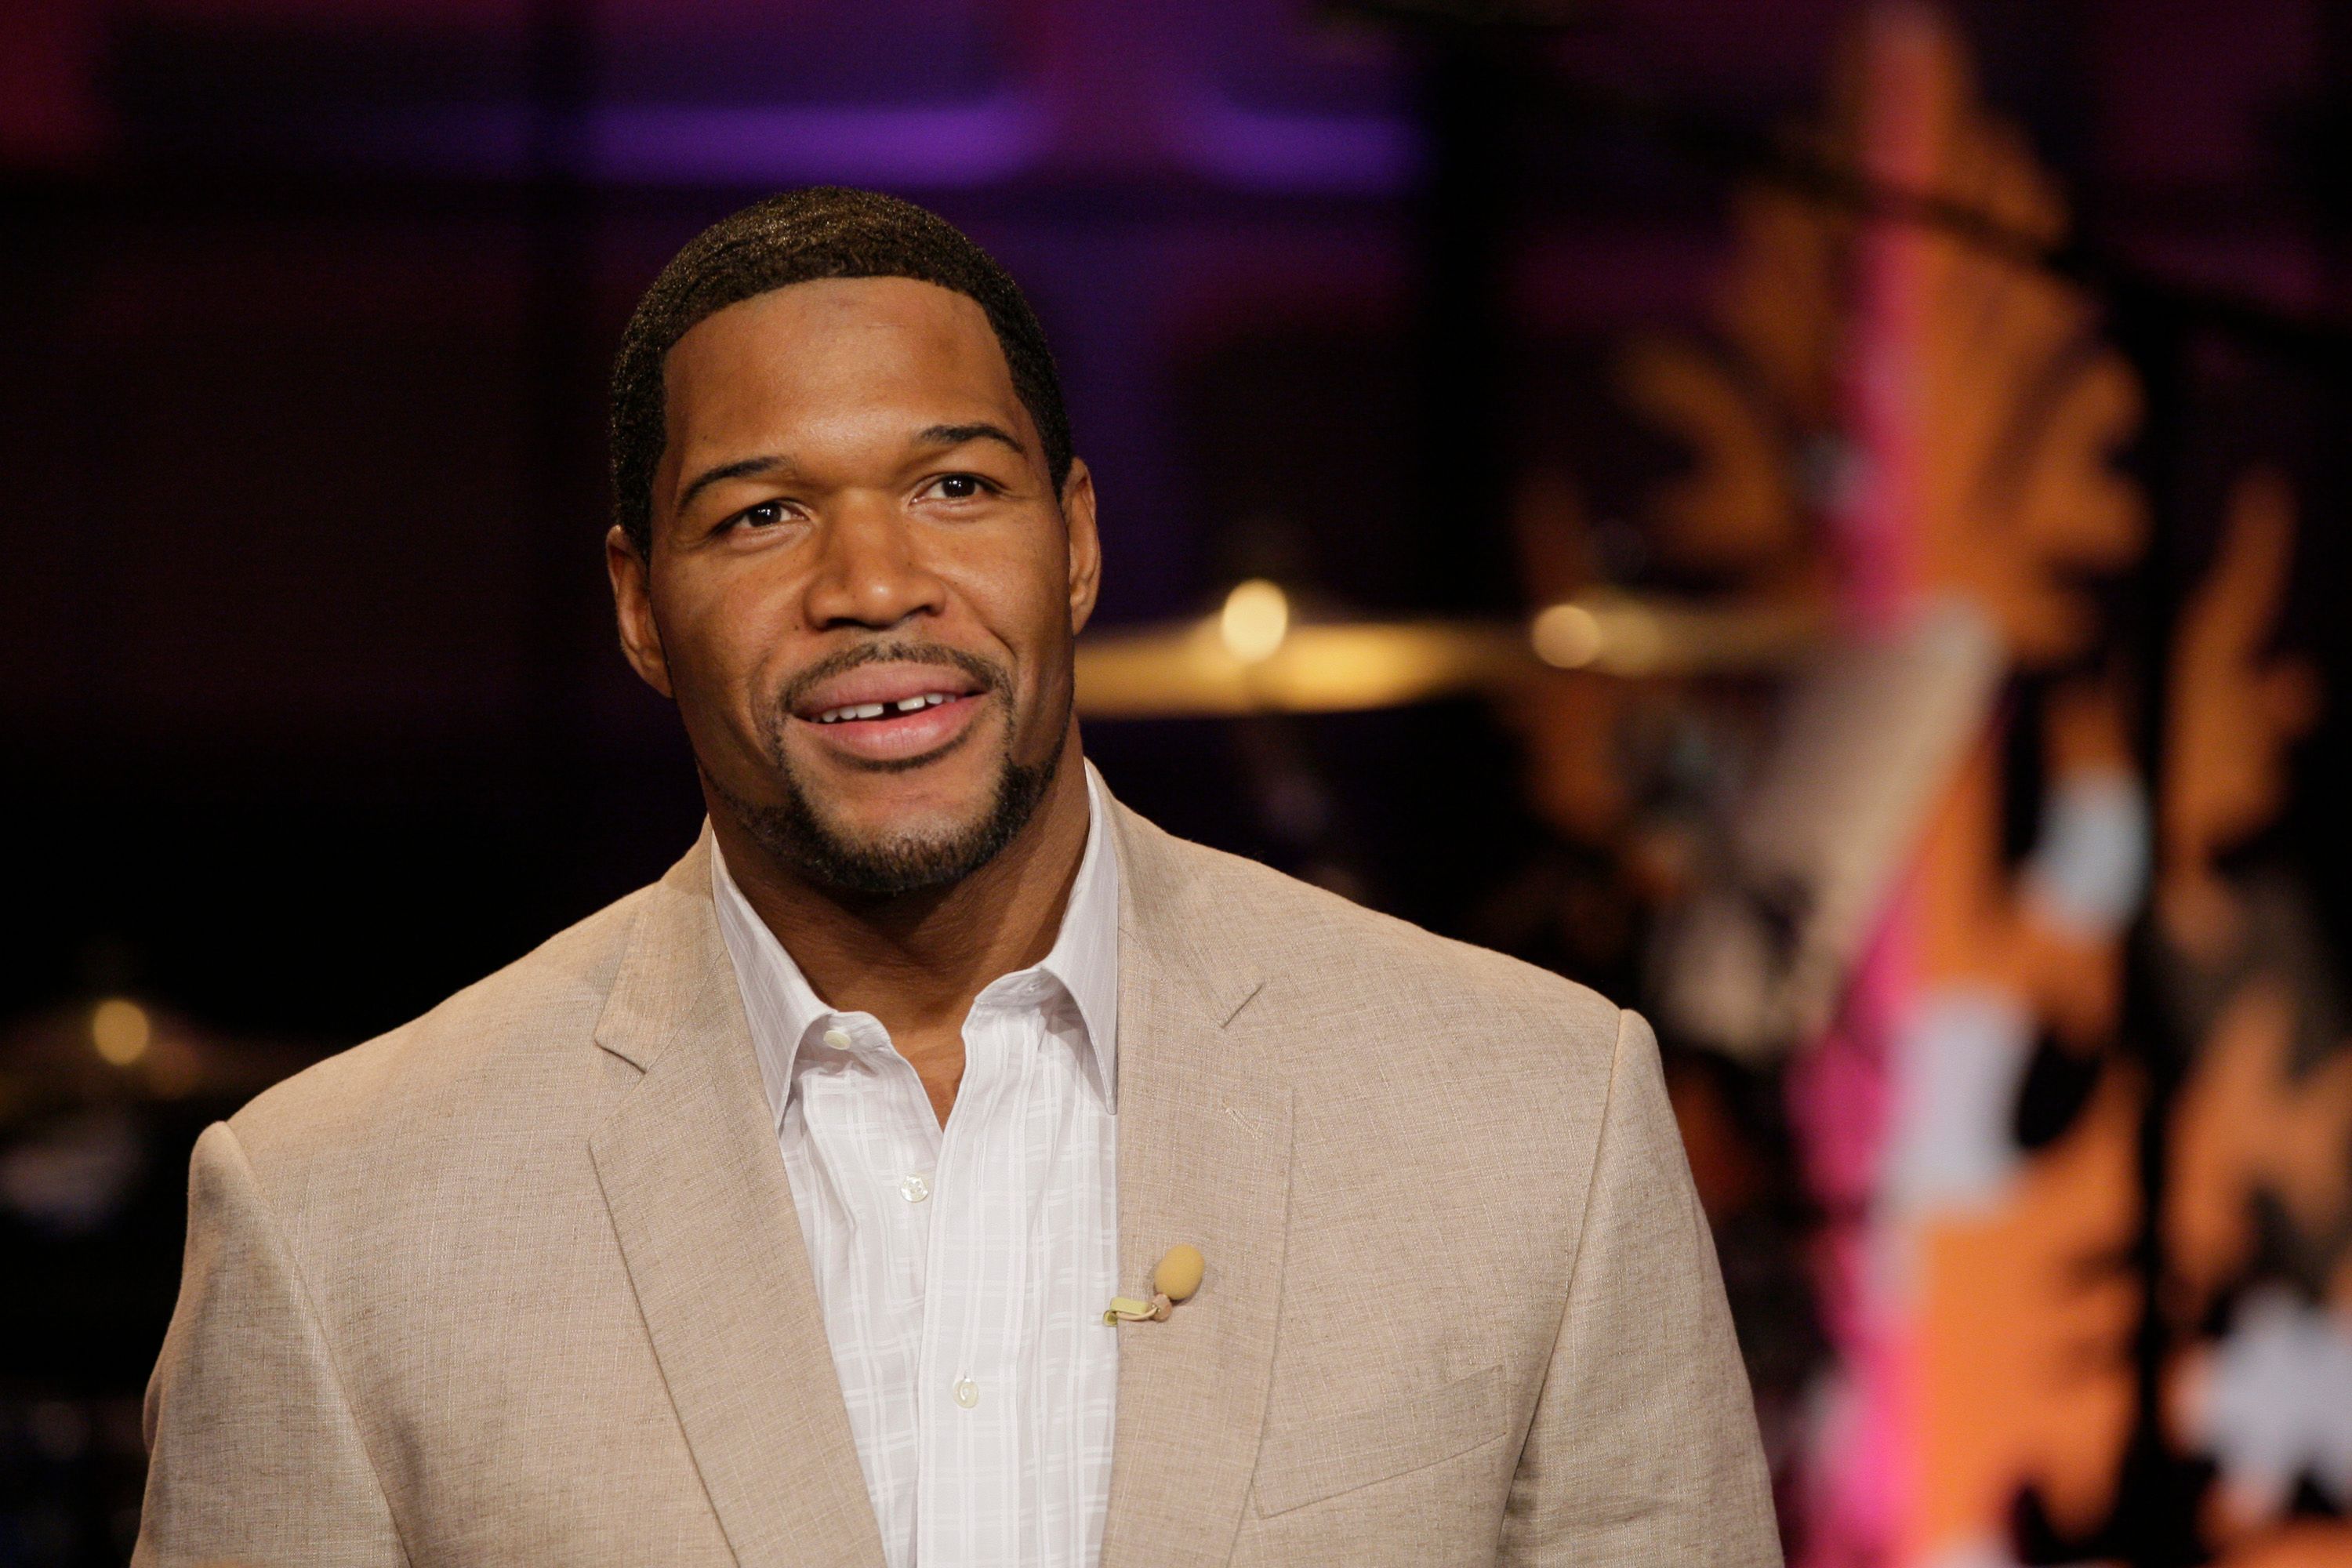 Michael Strahan during the "Tonight Show with Jay Leno" on December 20, 2013. | Source: Getty Images